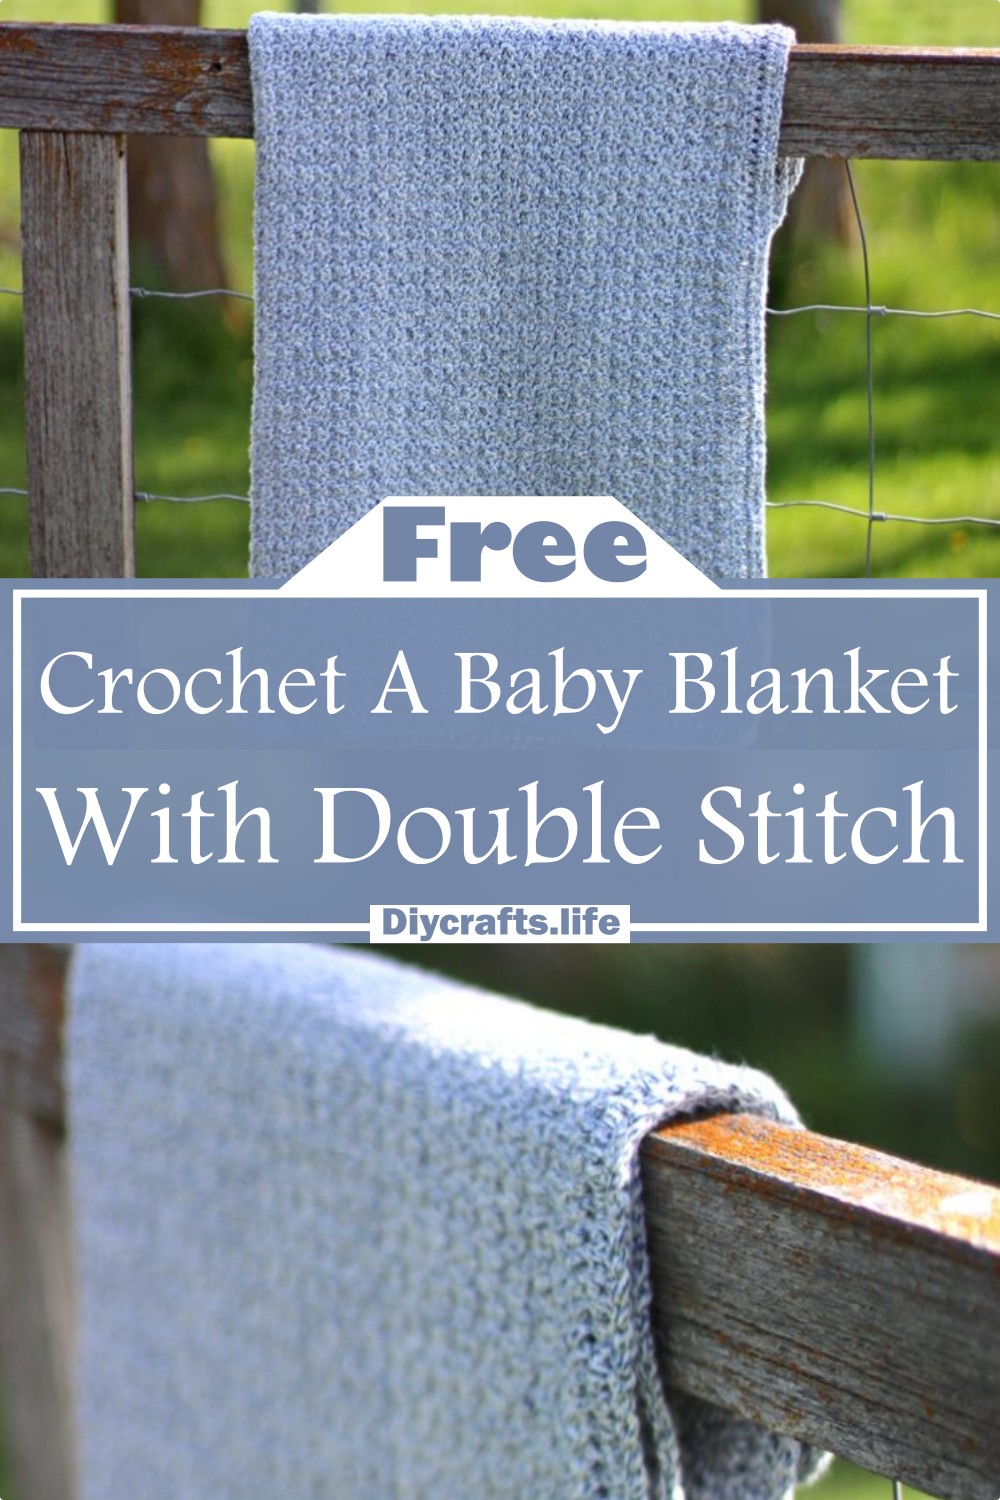 Crochet A Baby Blanket With Double Stitch